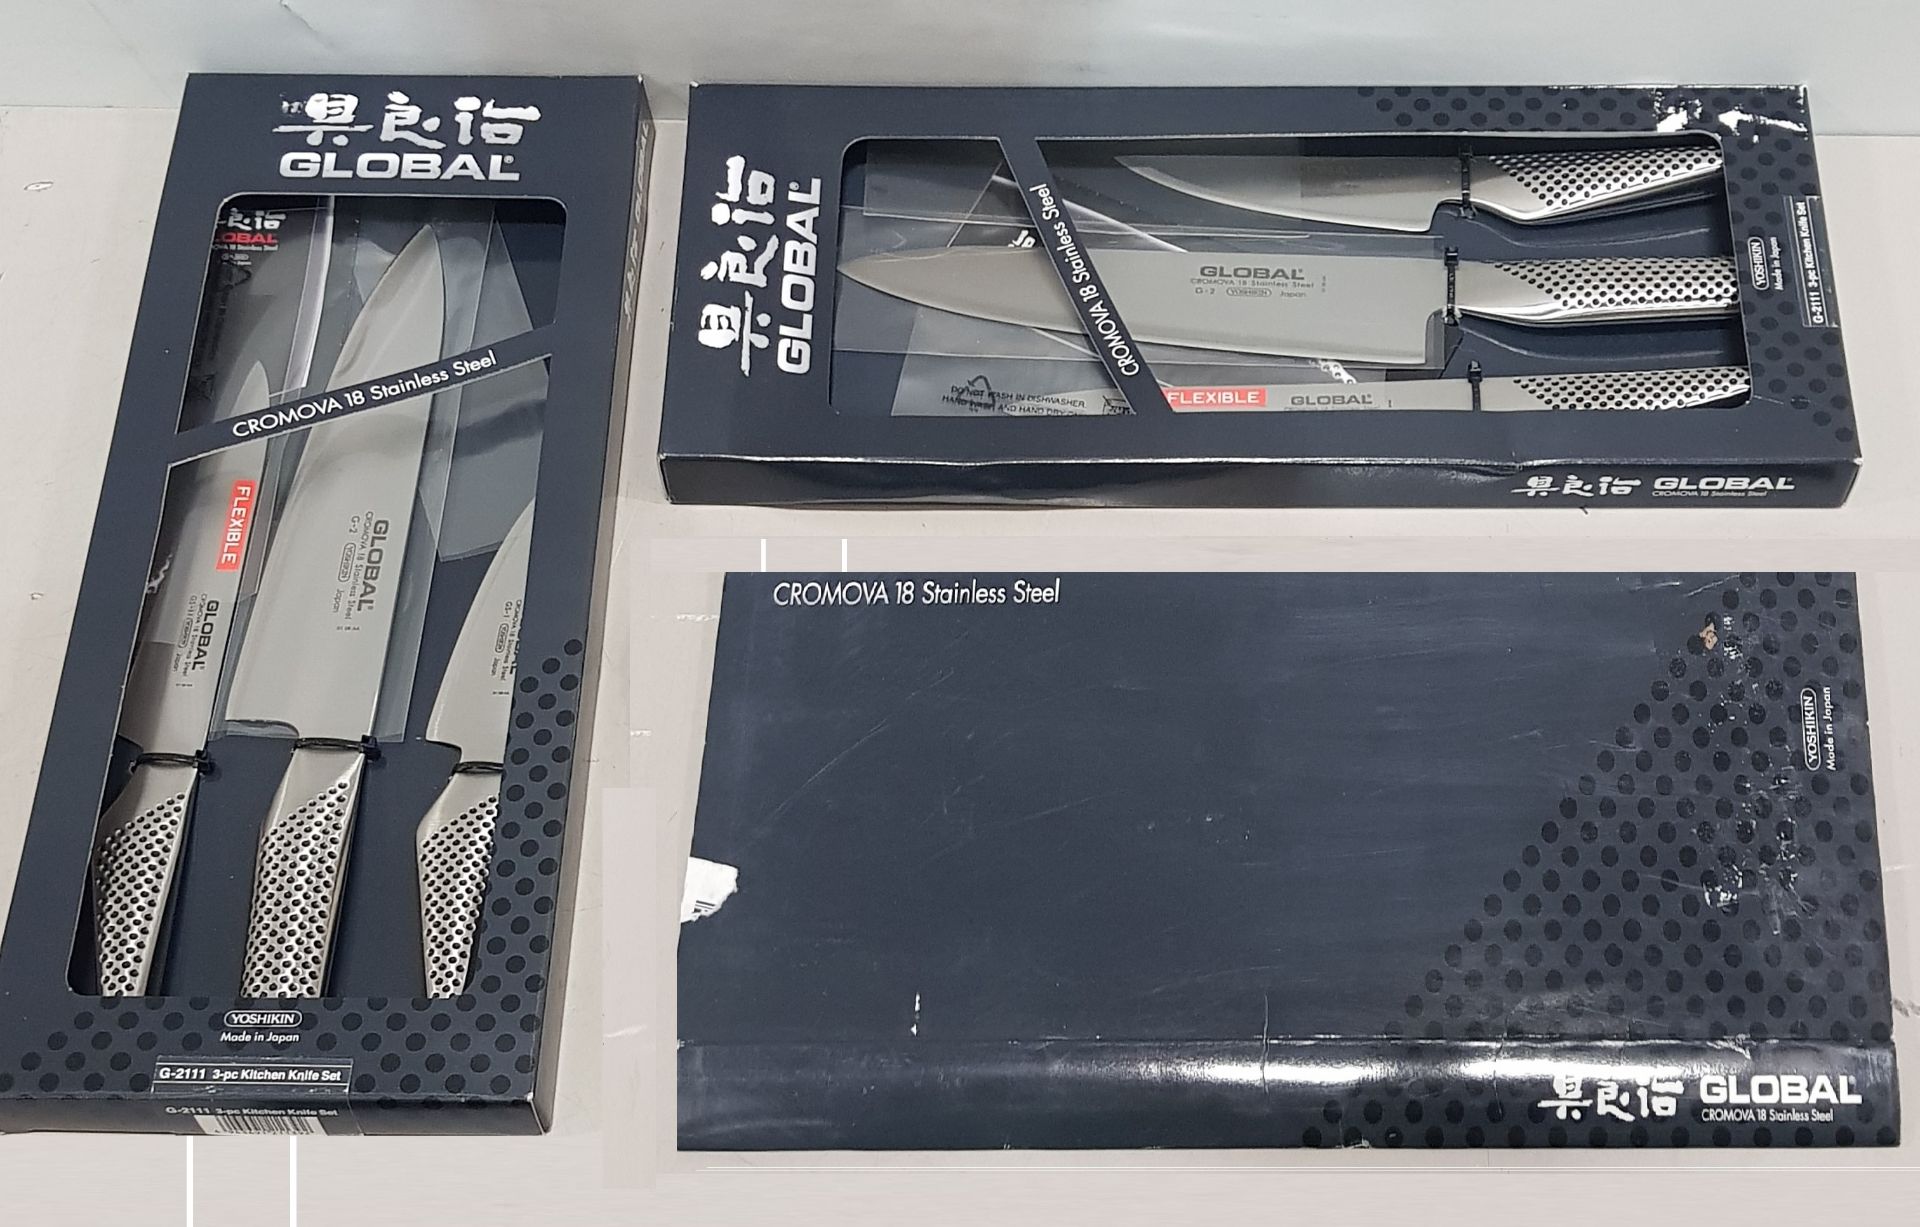 2 X BRAND NEW GLOBAL CROMOVA STAINLESS STEEL KITCHEN KNIFE SETS RRP £295 PER SET - TOTAL £580 (NOTE: